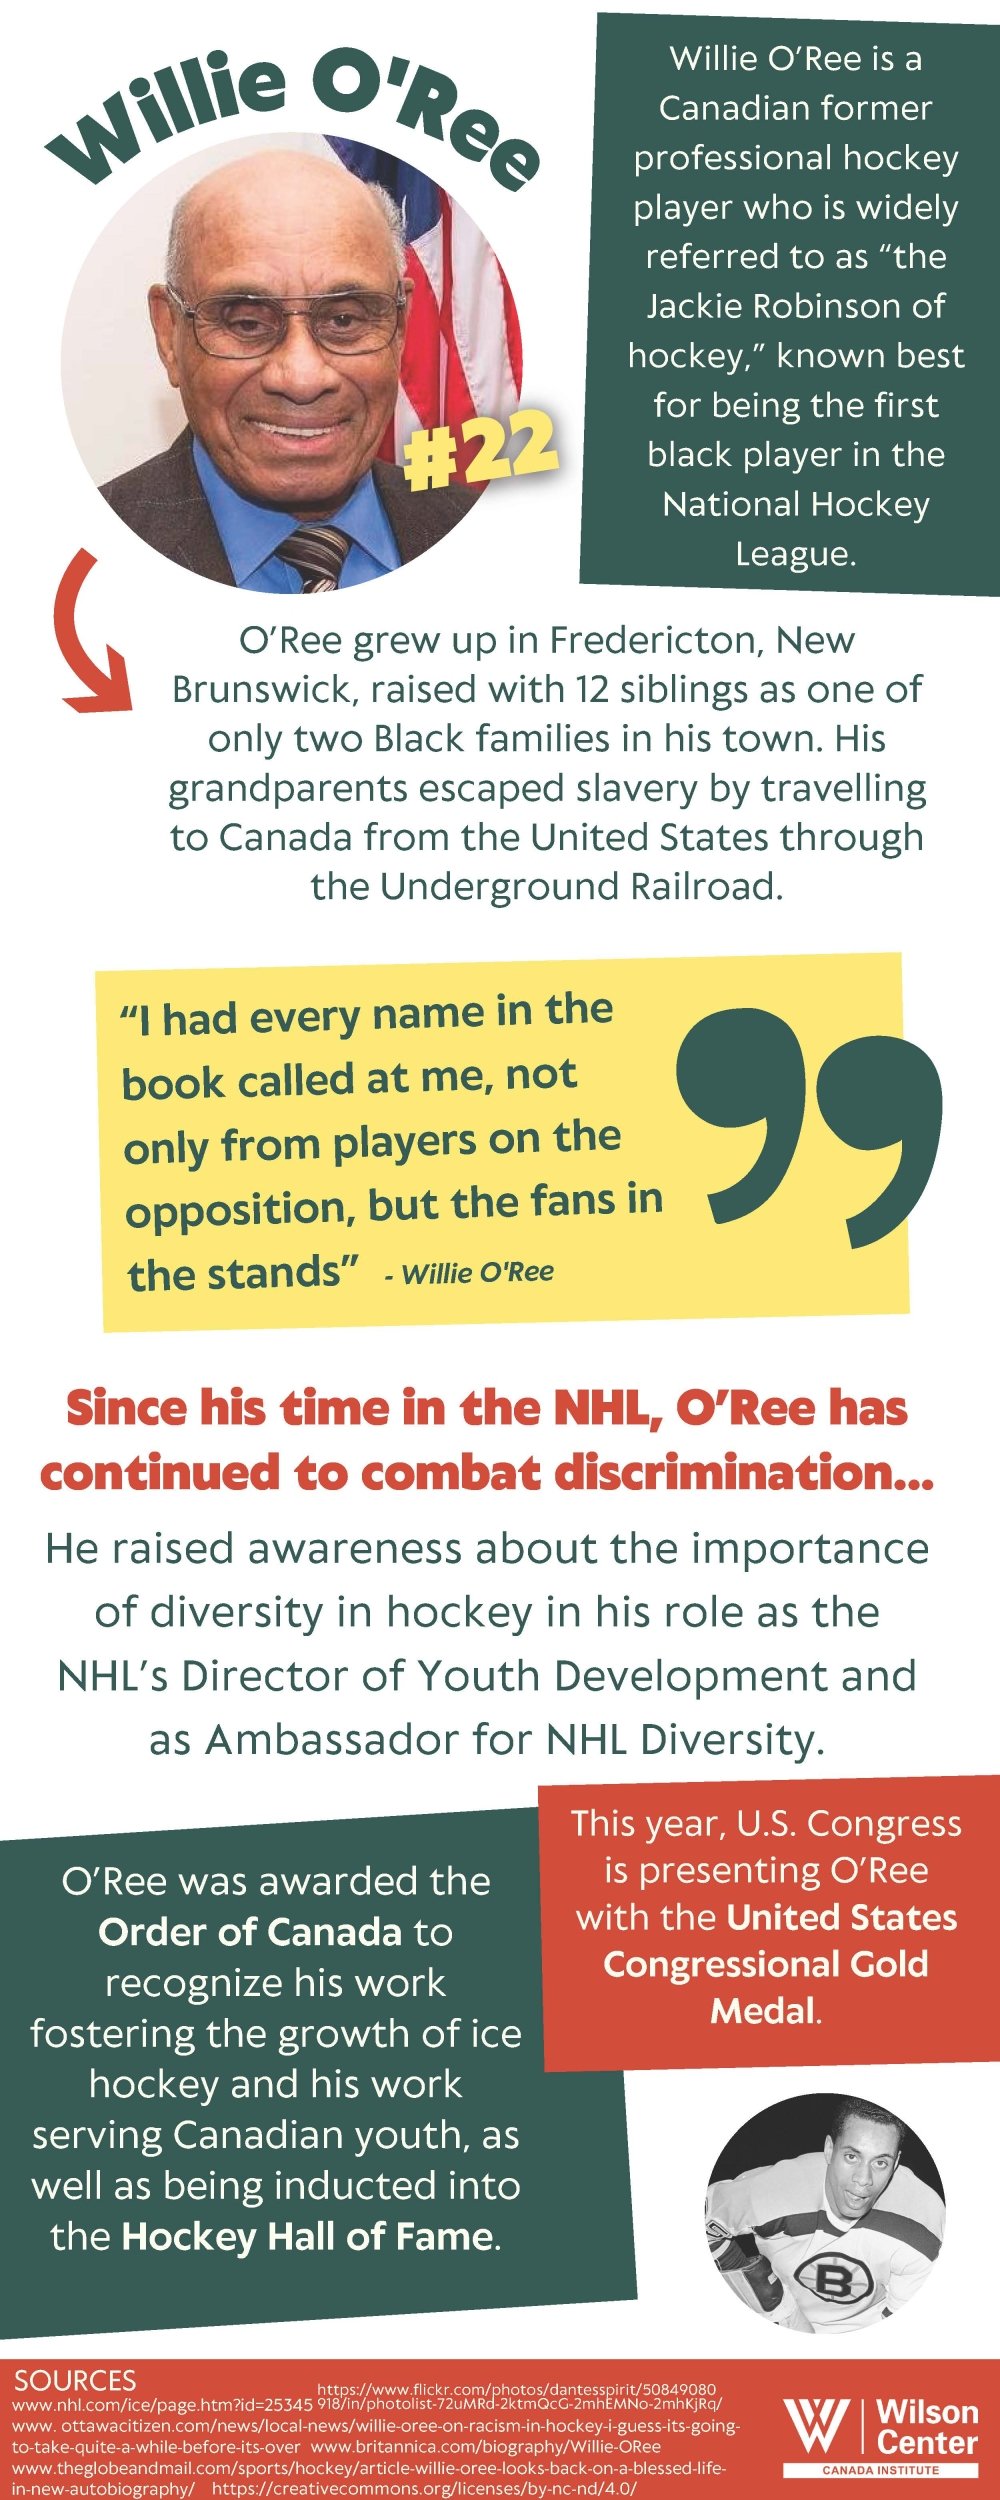 Infographic of Willie O'Ree, Canadian former hockey player